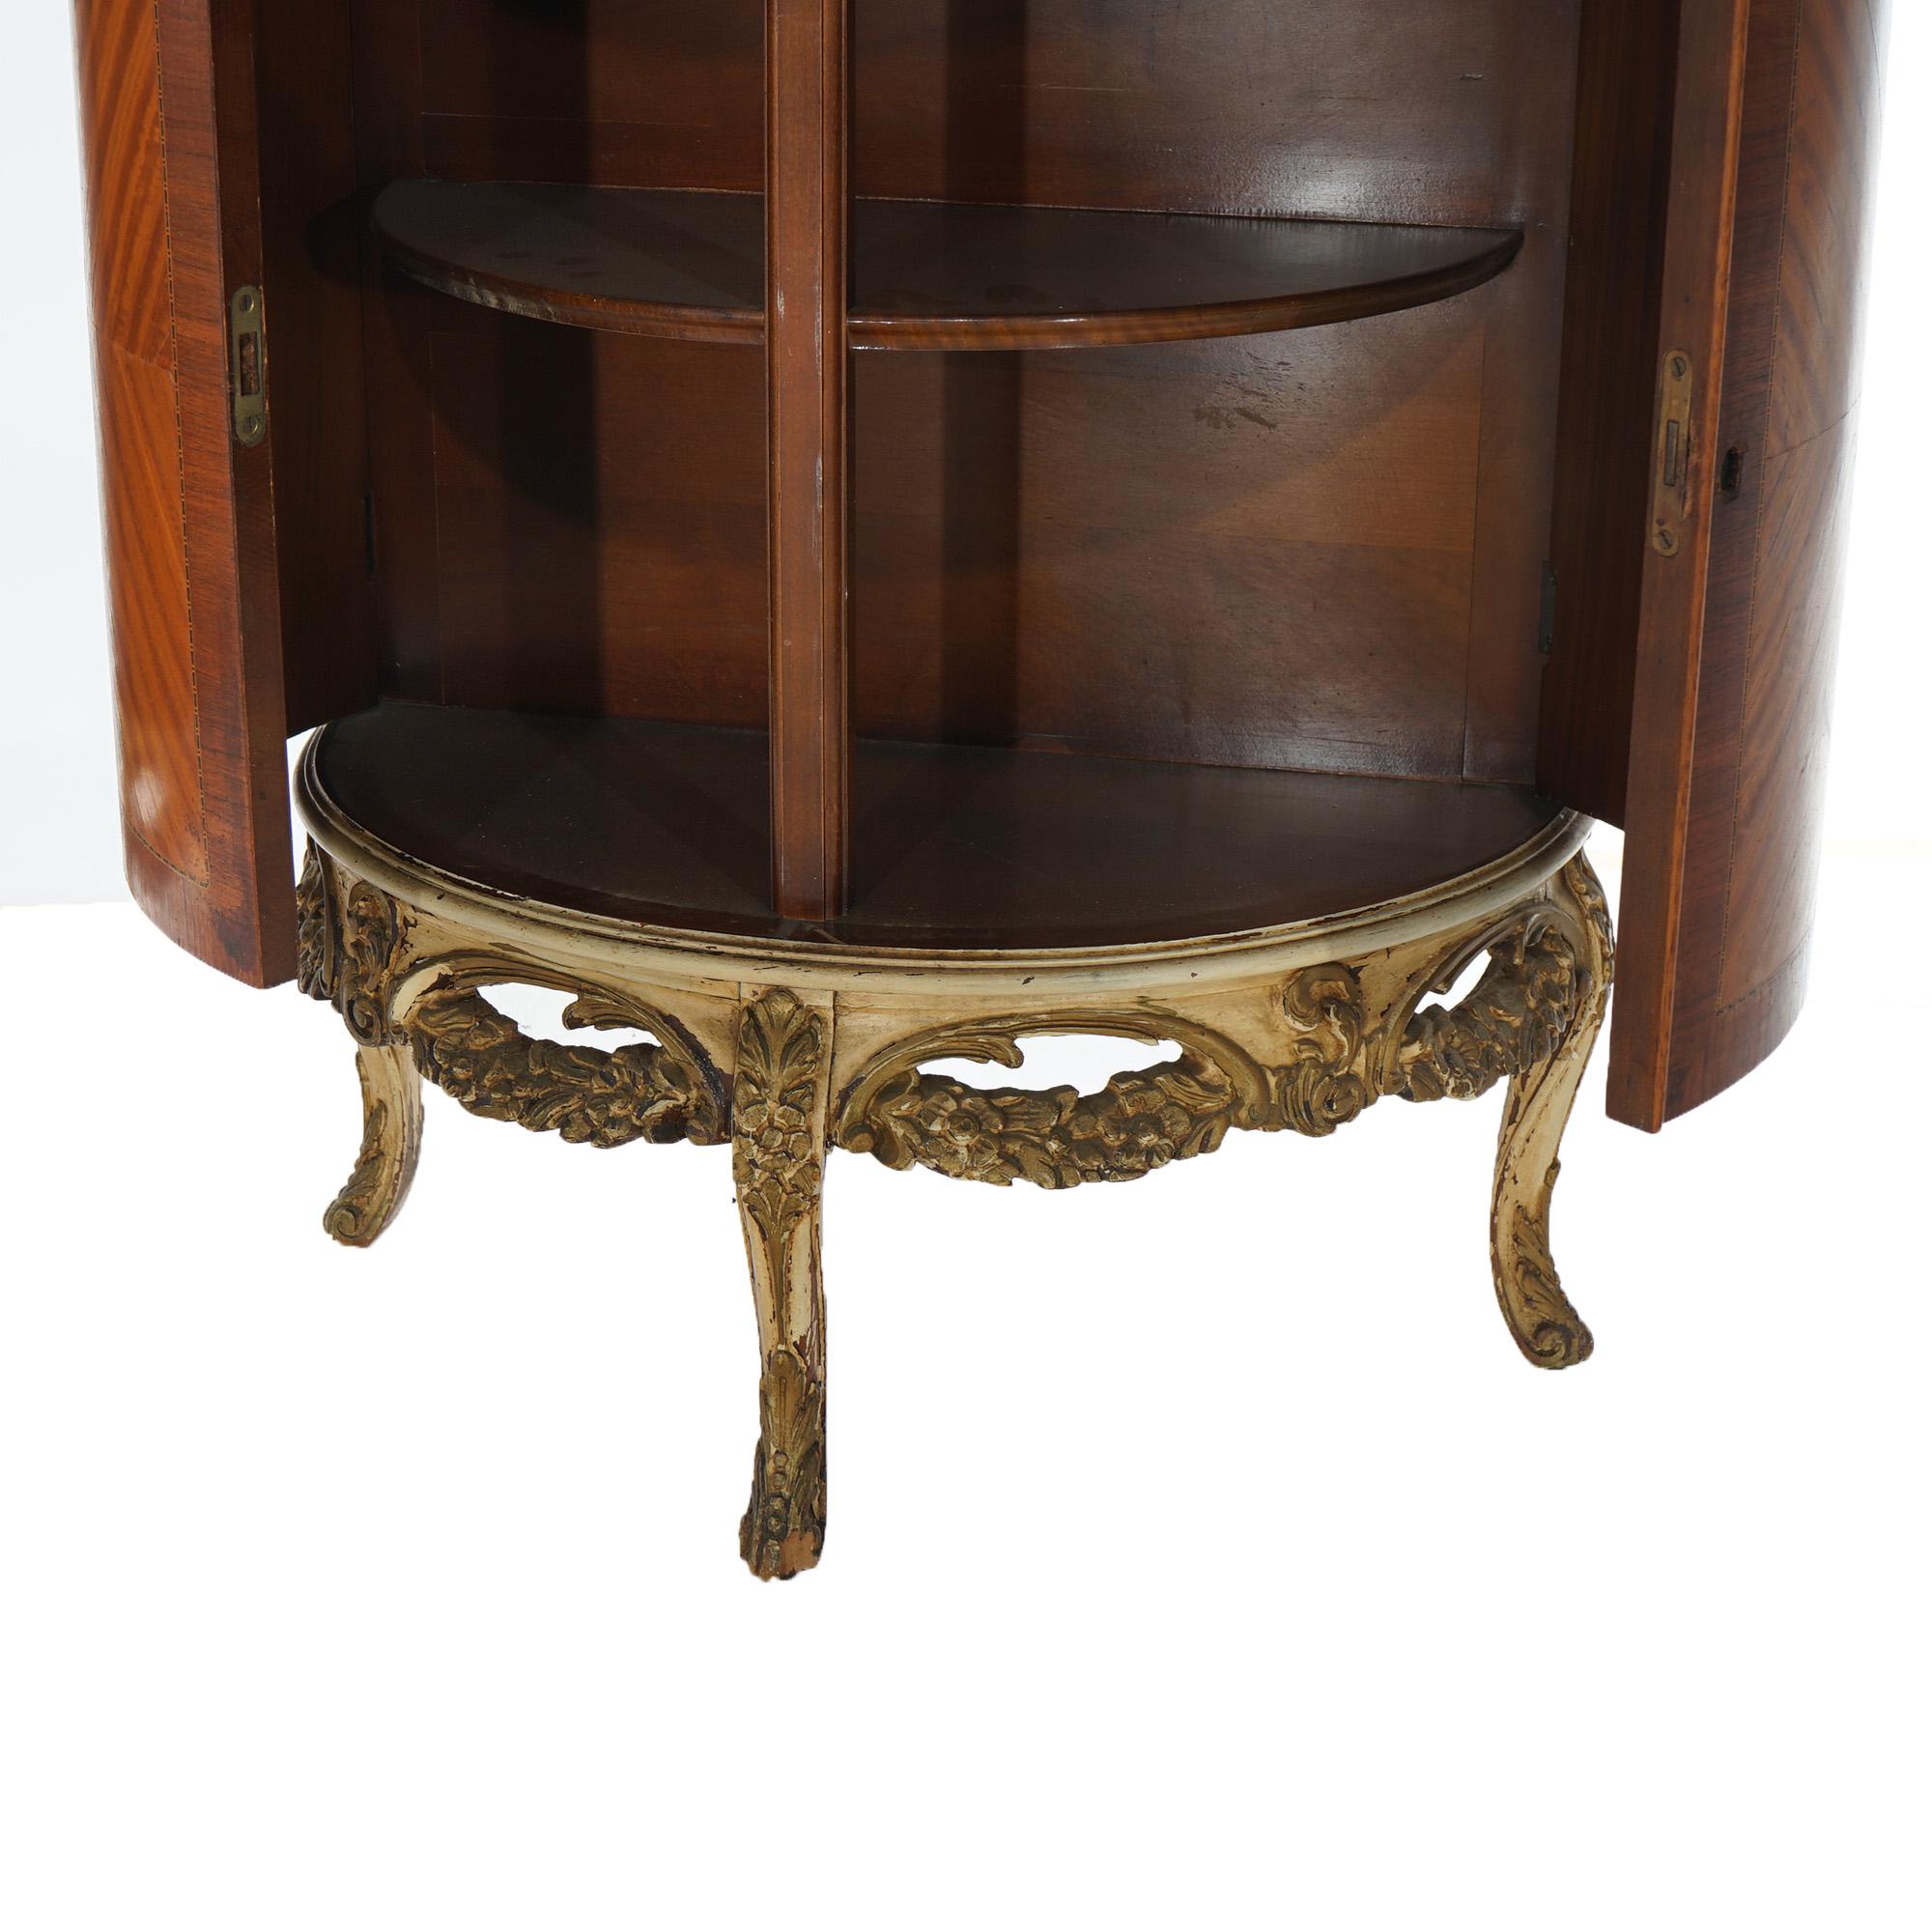 Two Antique Antique French Satinwood Inlaid Marquetry Demilune Side Tables C1920 For Sale 3